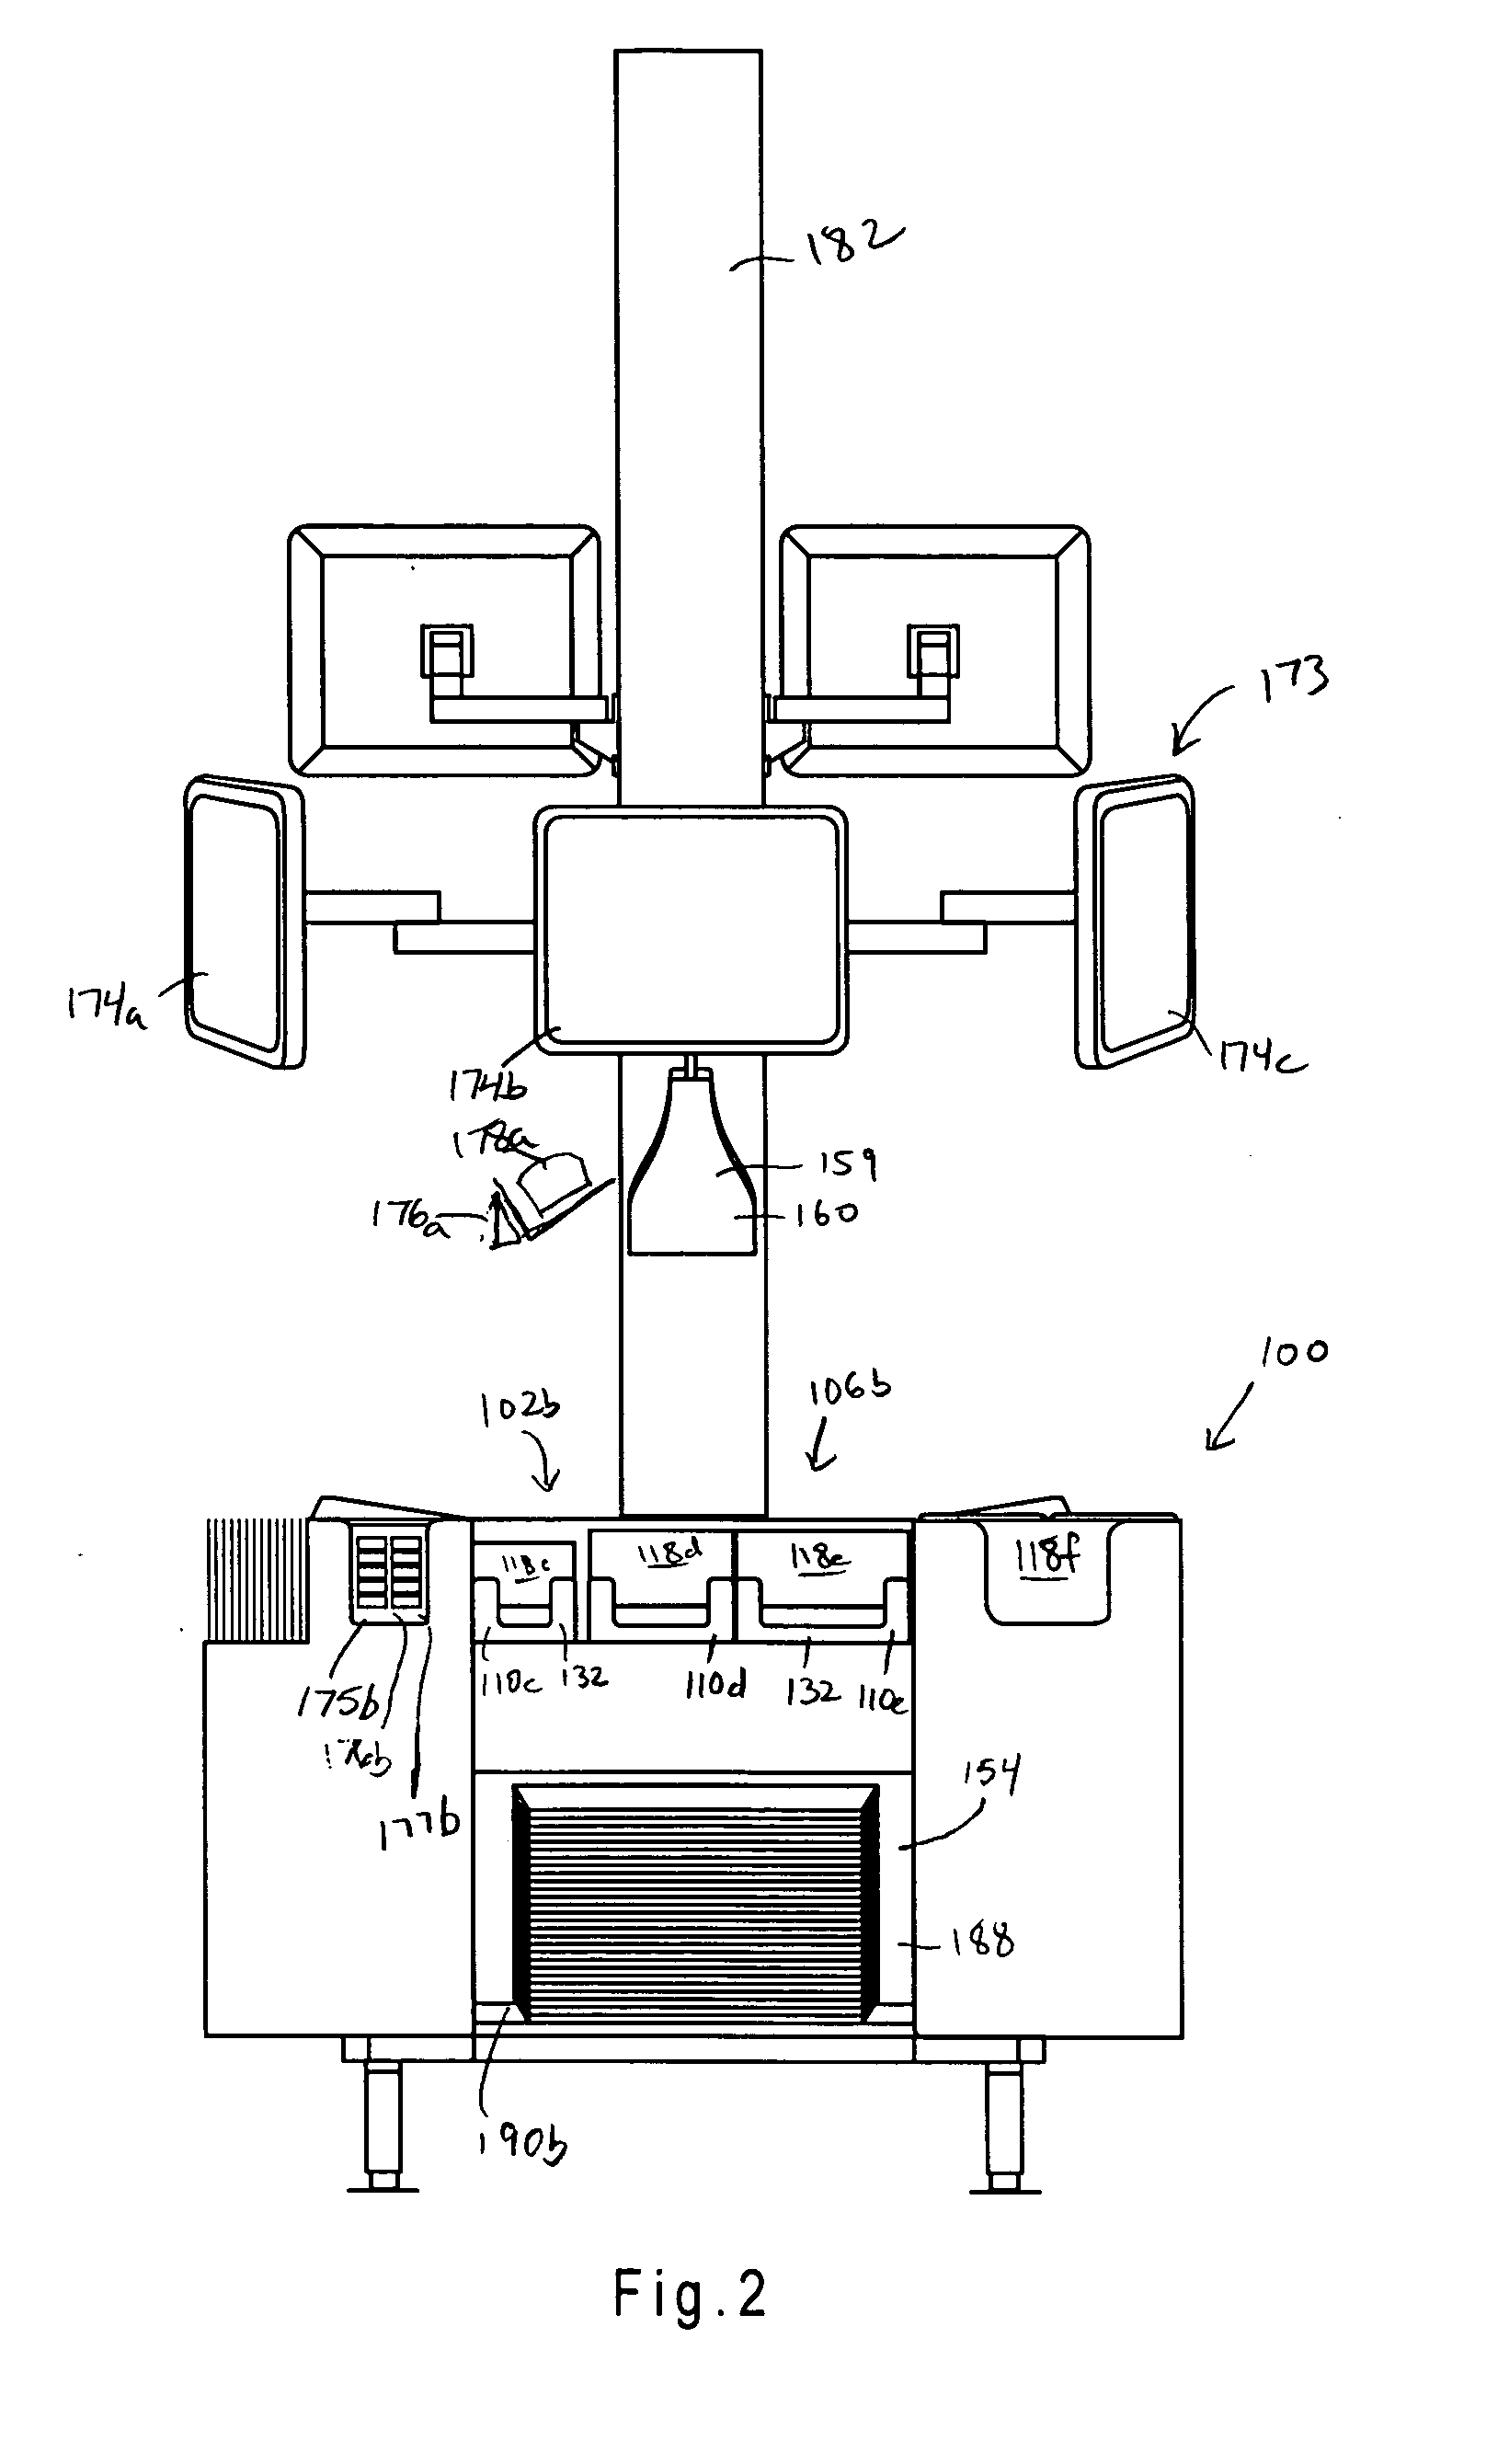 Device, system and method for assembling food orders